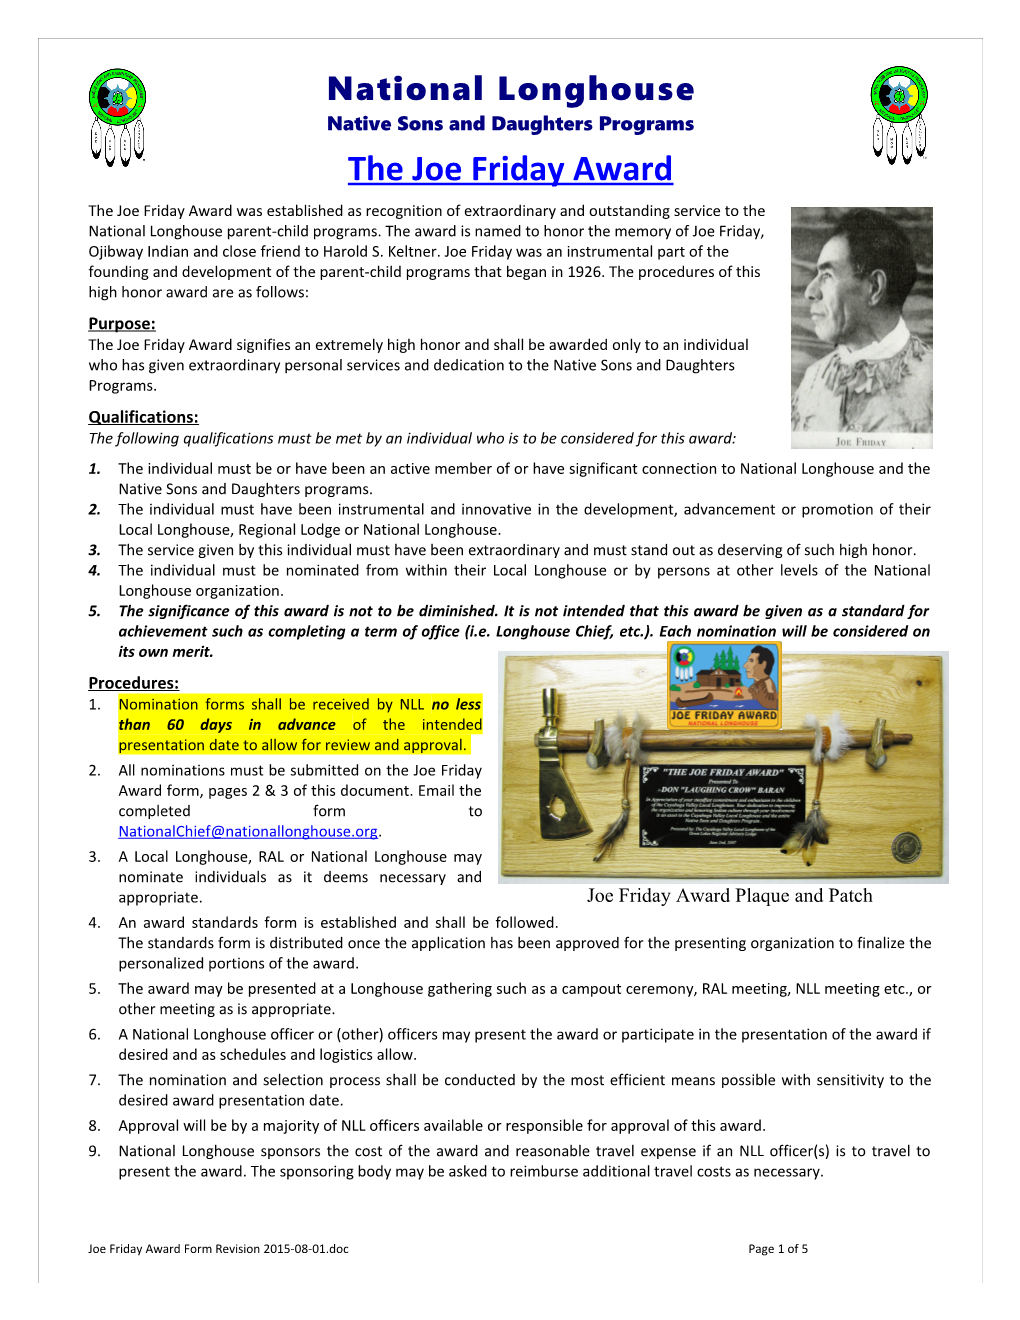 The Great Lakes Regional Advisory Lodge Established the Joe Friday Award As a Recognition